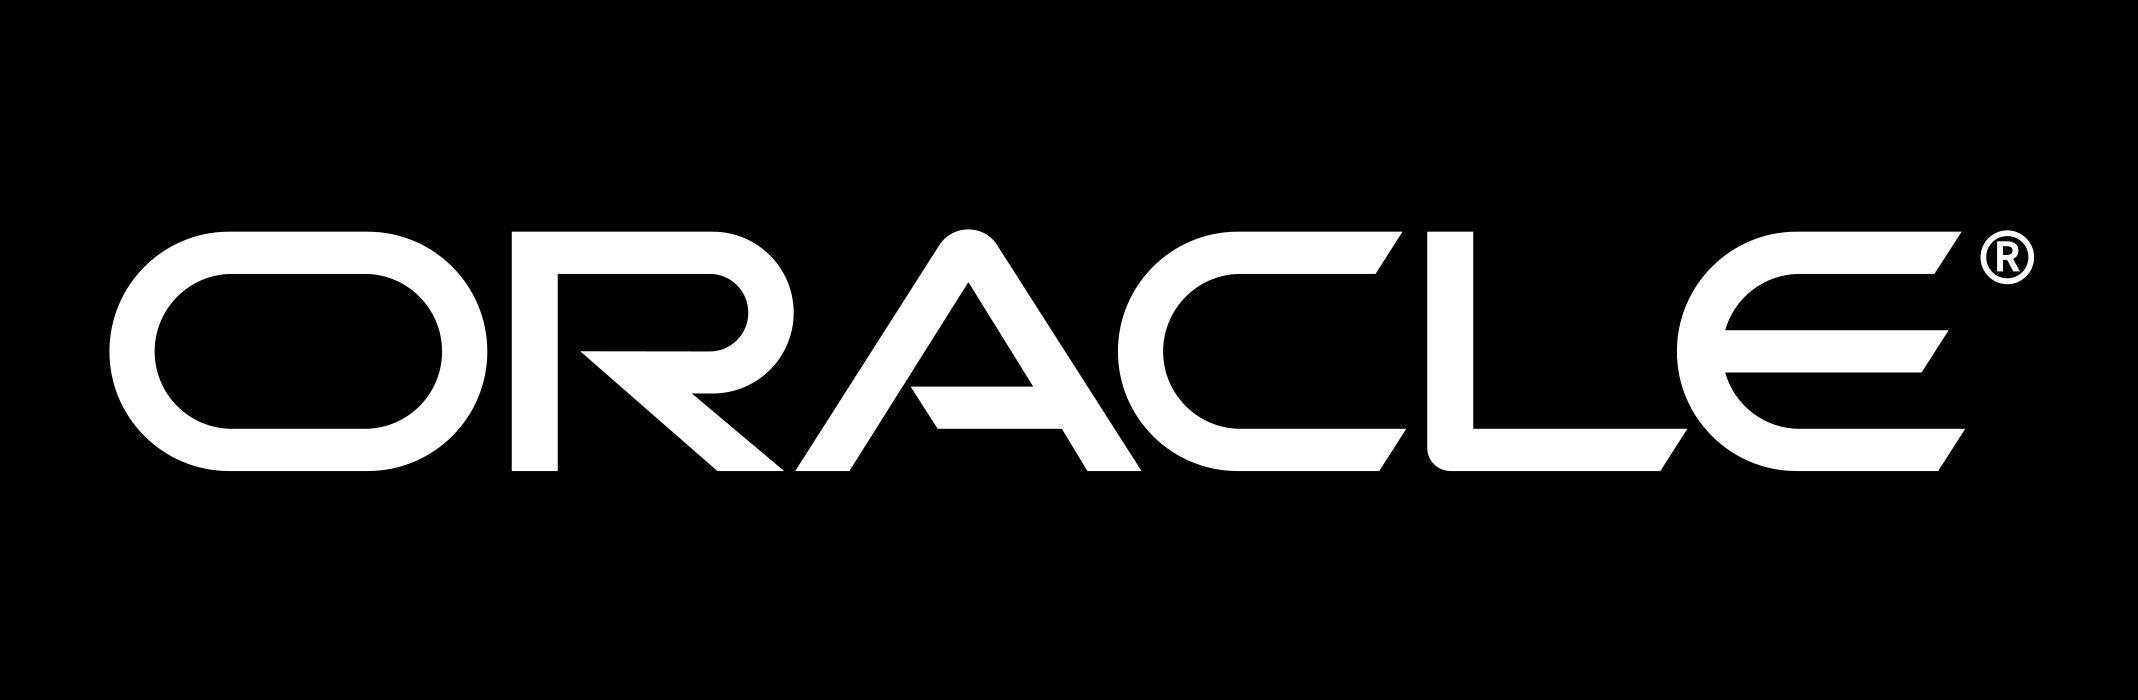 Oracle Company Logo - Oracle Logo, Oracle Symbol, Meaning, History and Evolution